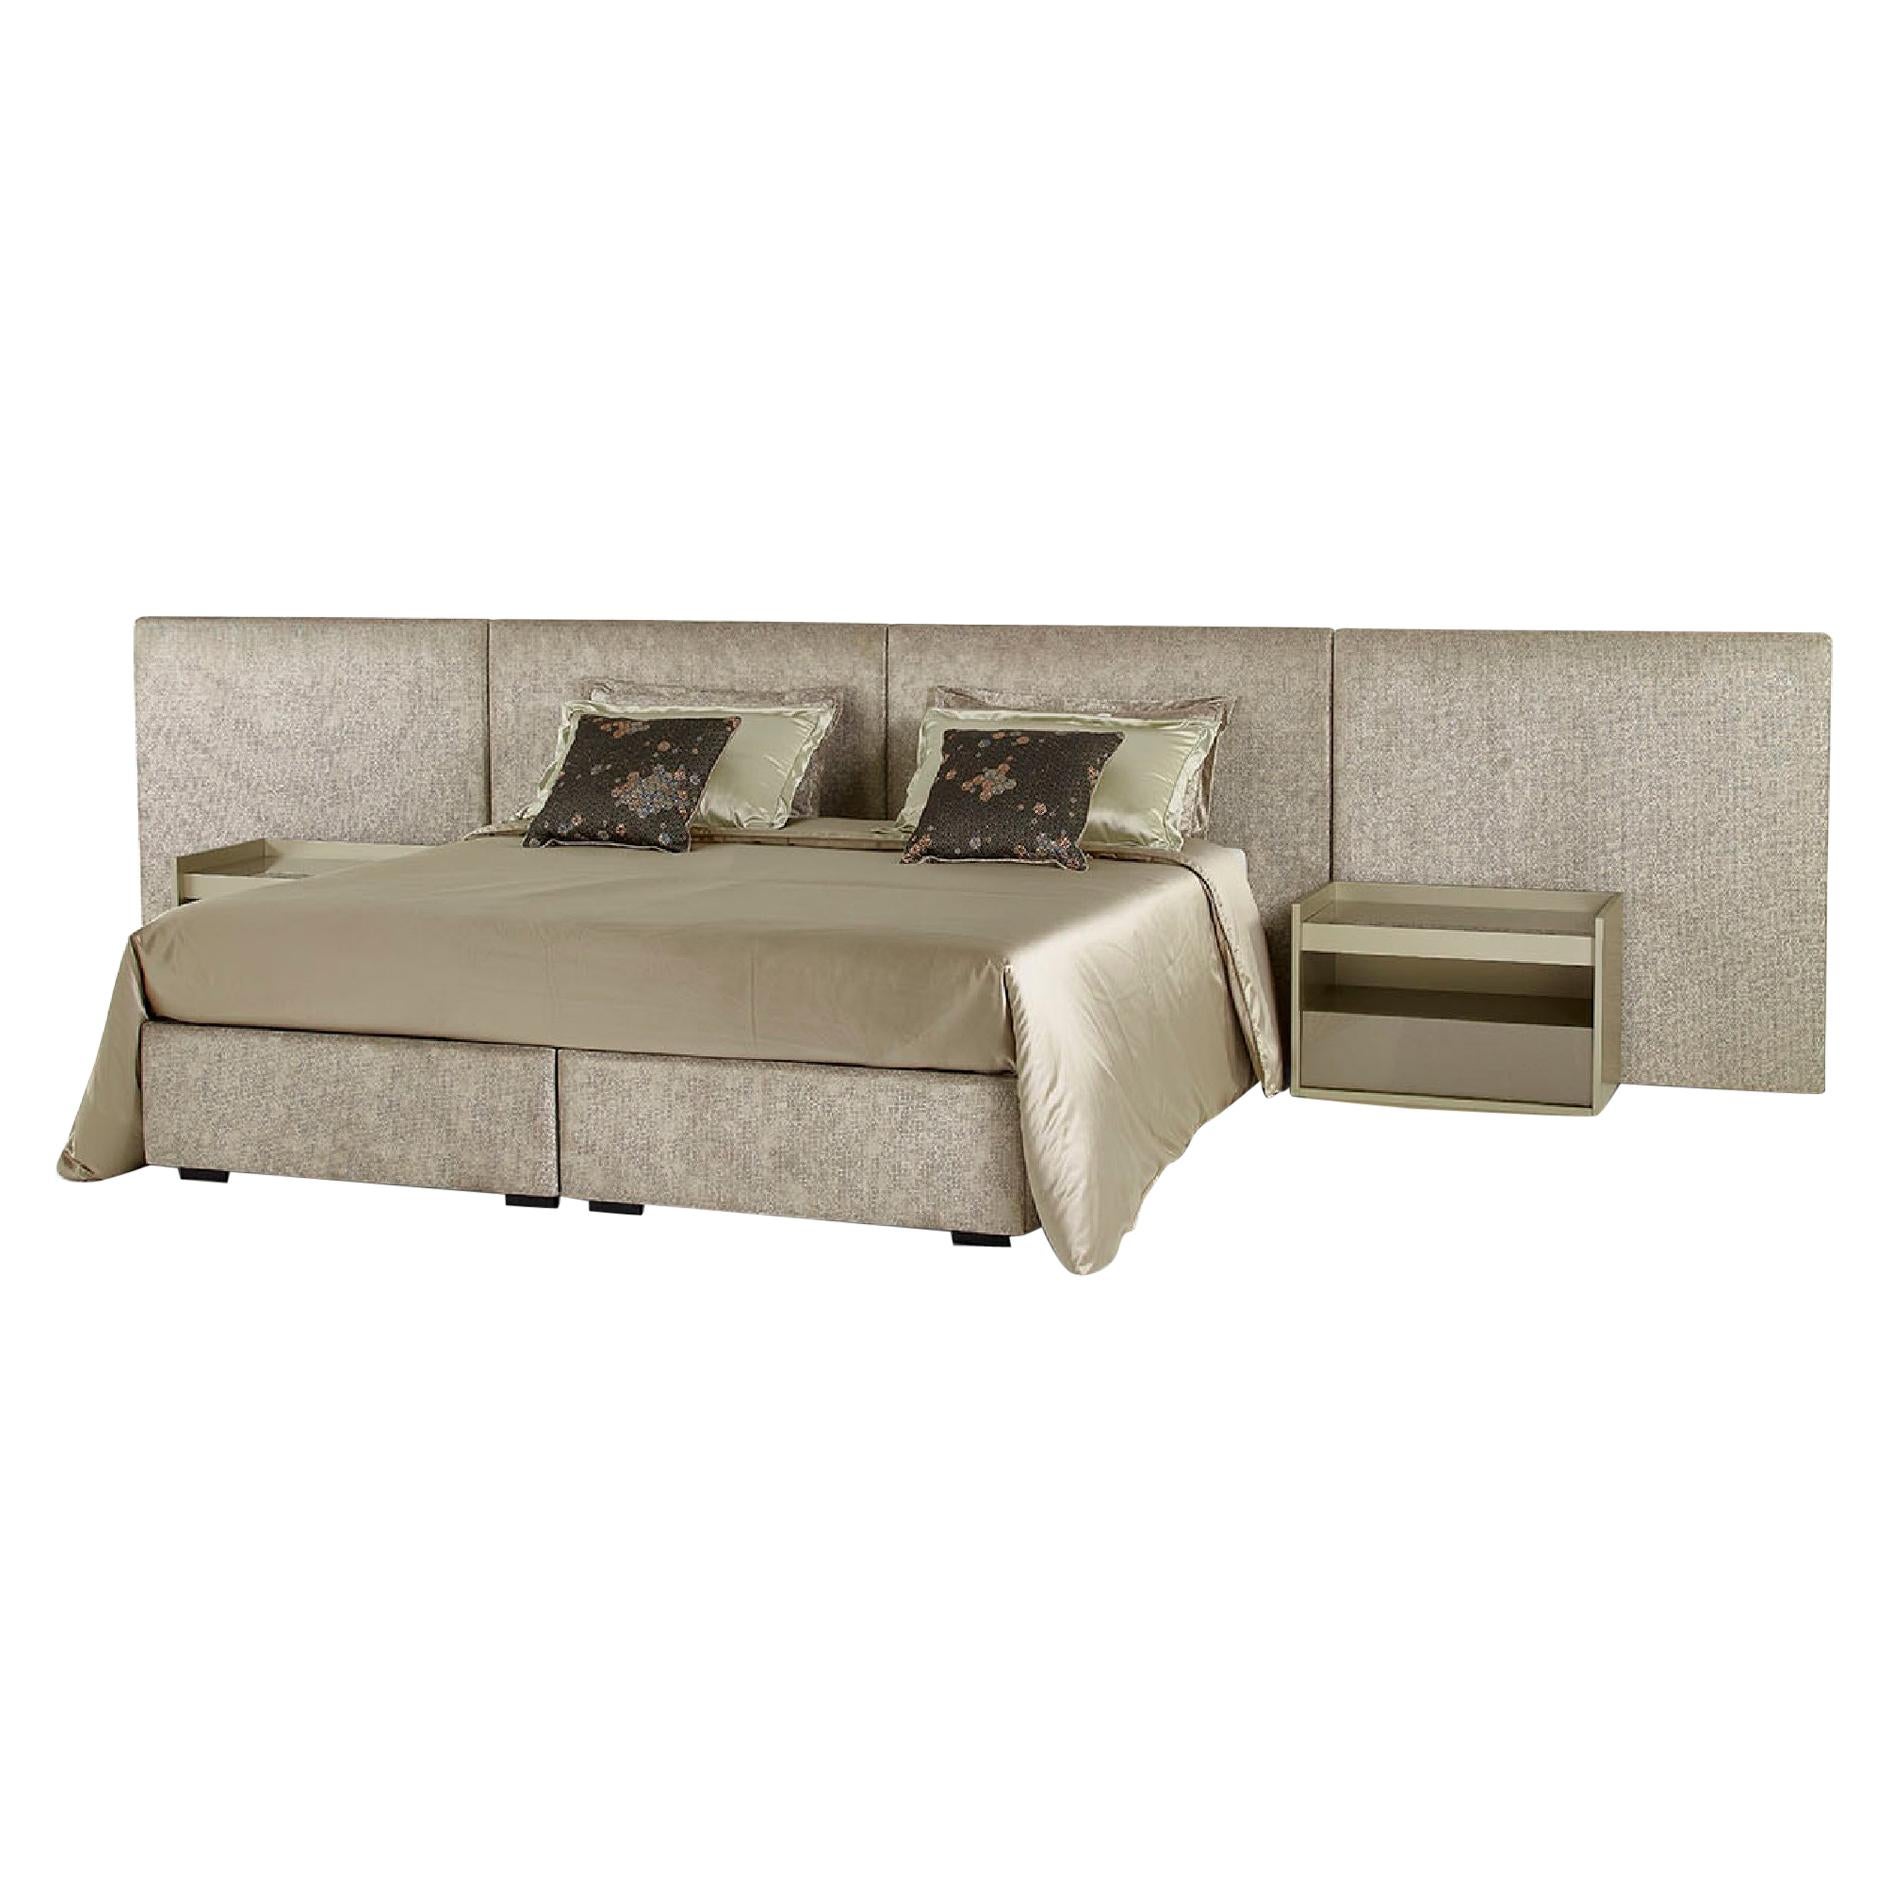 Fantastic Bed Headboard and Bed Frame in  Wood Available in Fabric or Leather